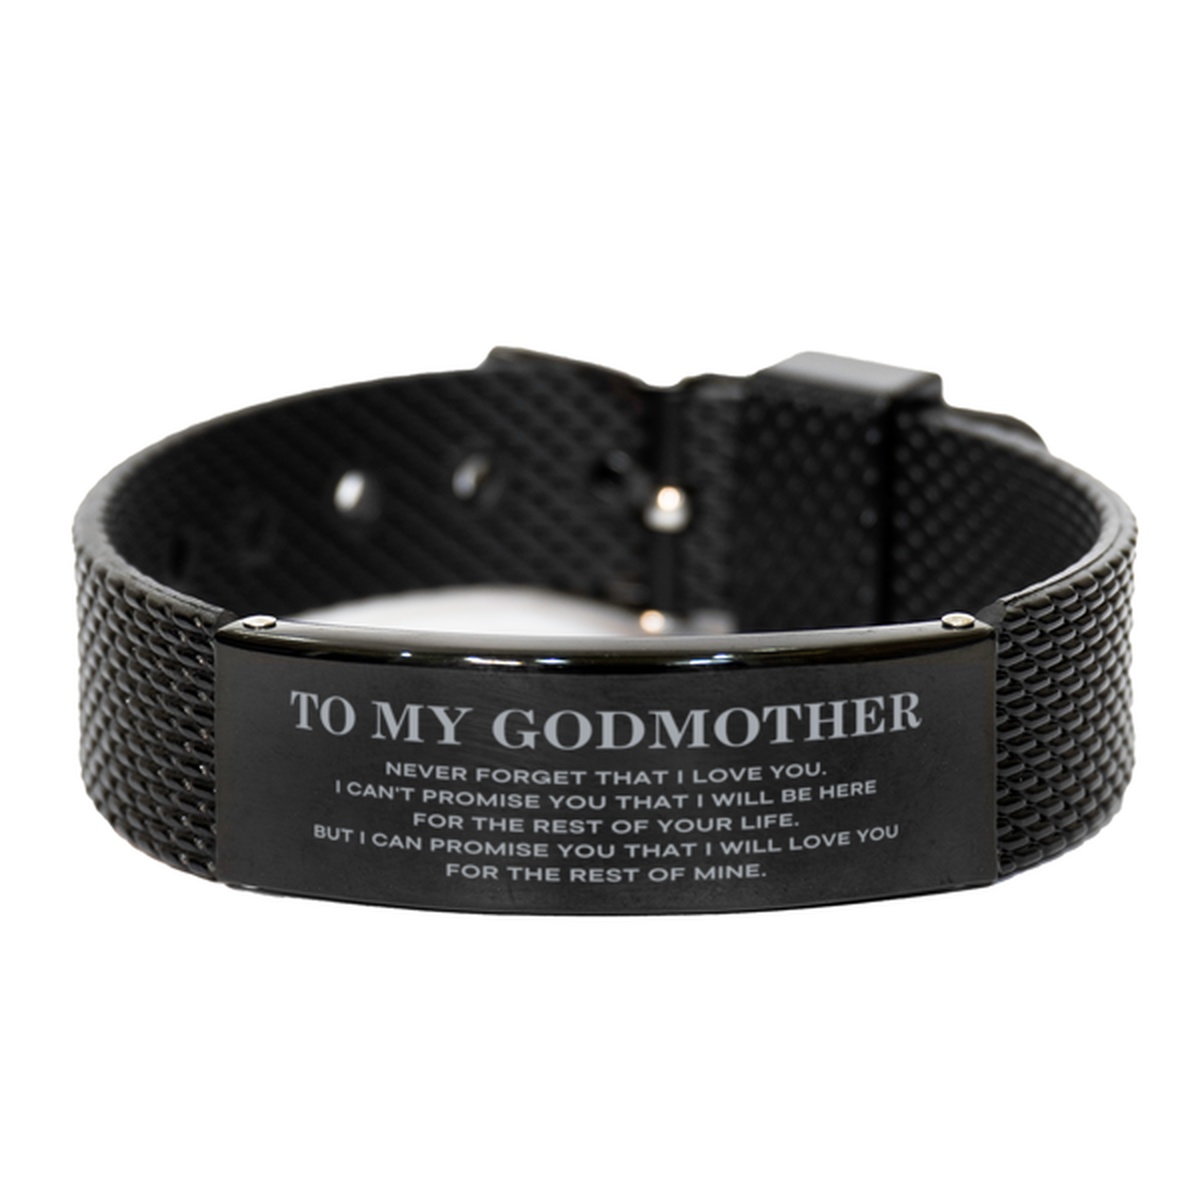 To My Godmother Gifts, I will love you for the rest of mine, Love Godmother Bracelet, Birthday Christmas Unique Black Shark Mesh Bracelet For Godmother